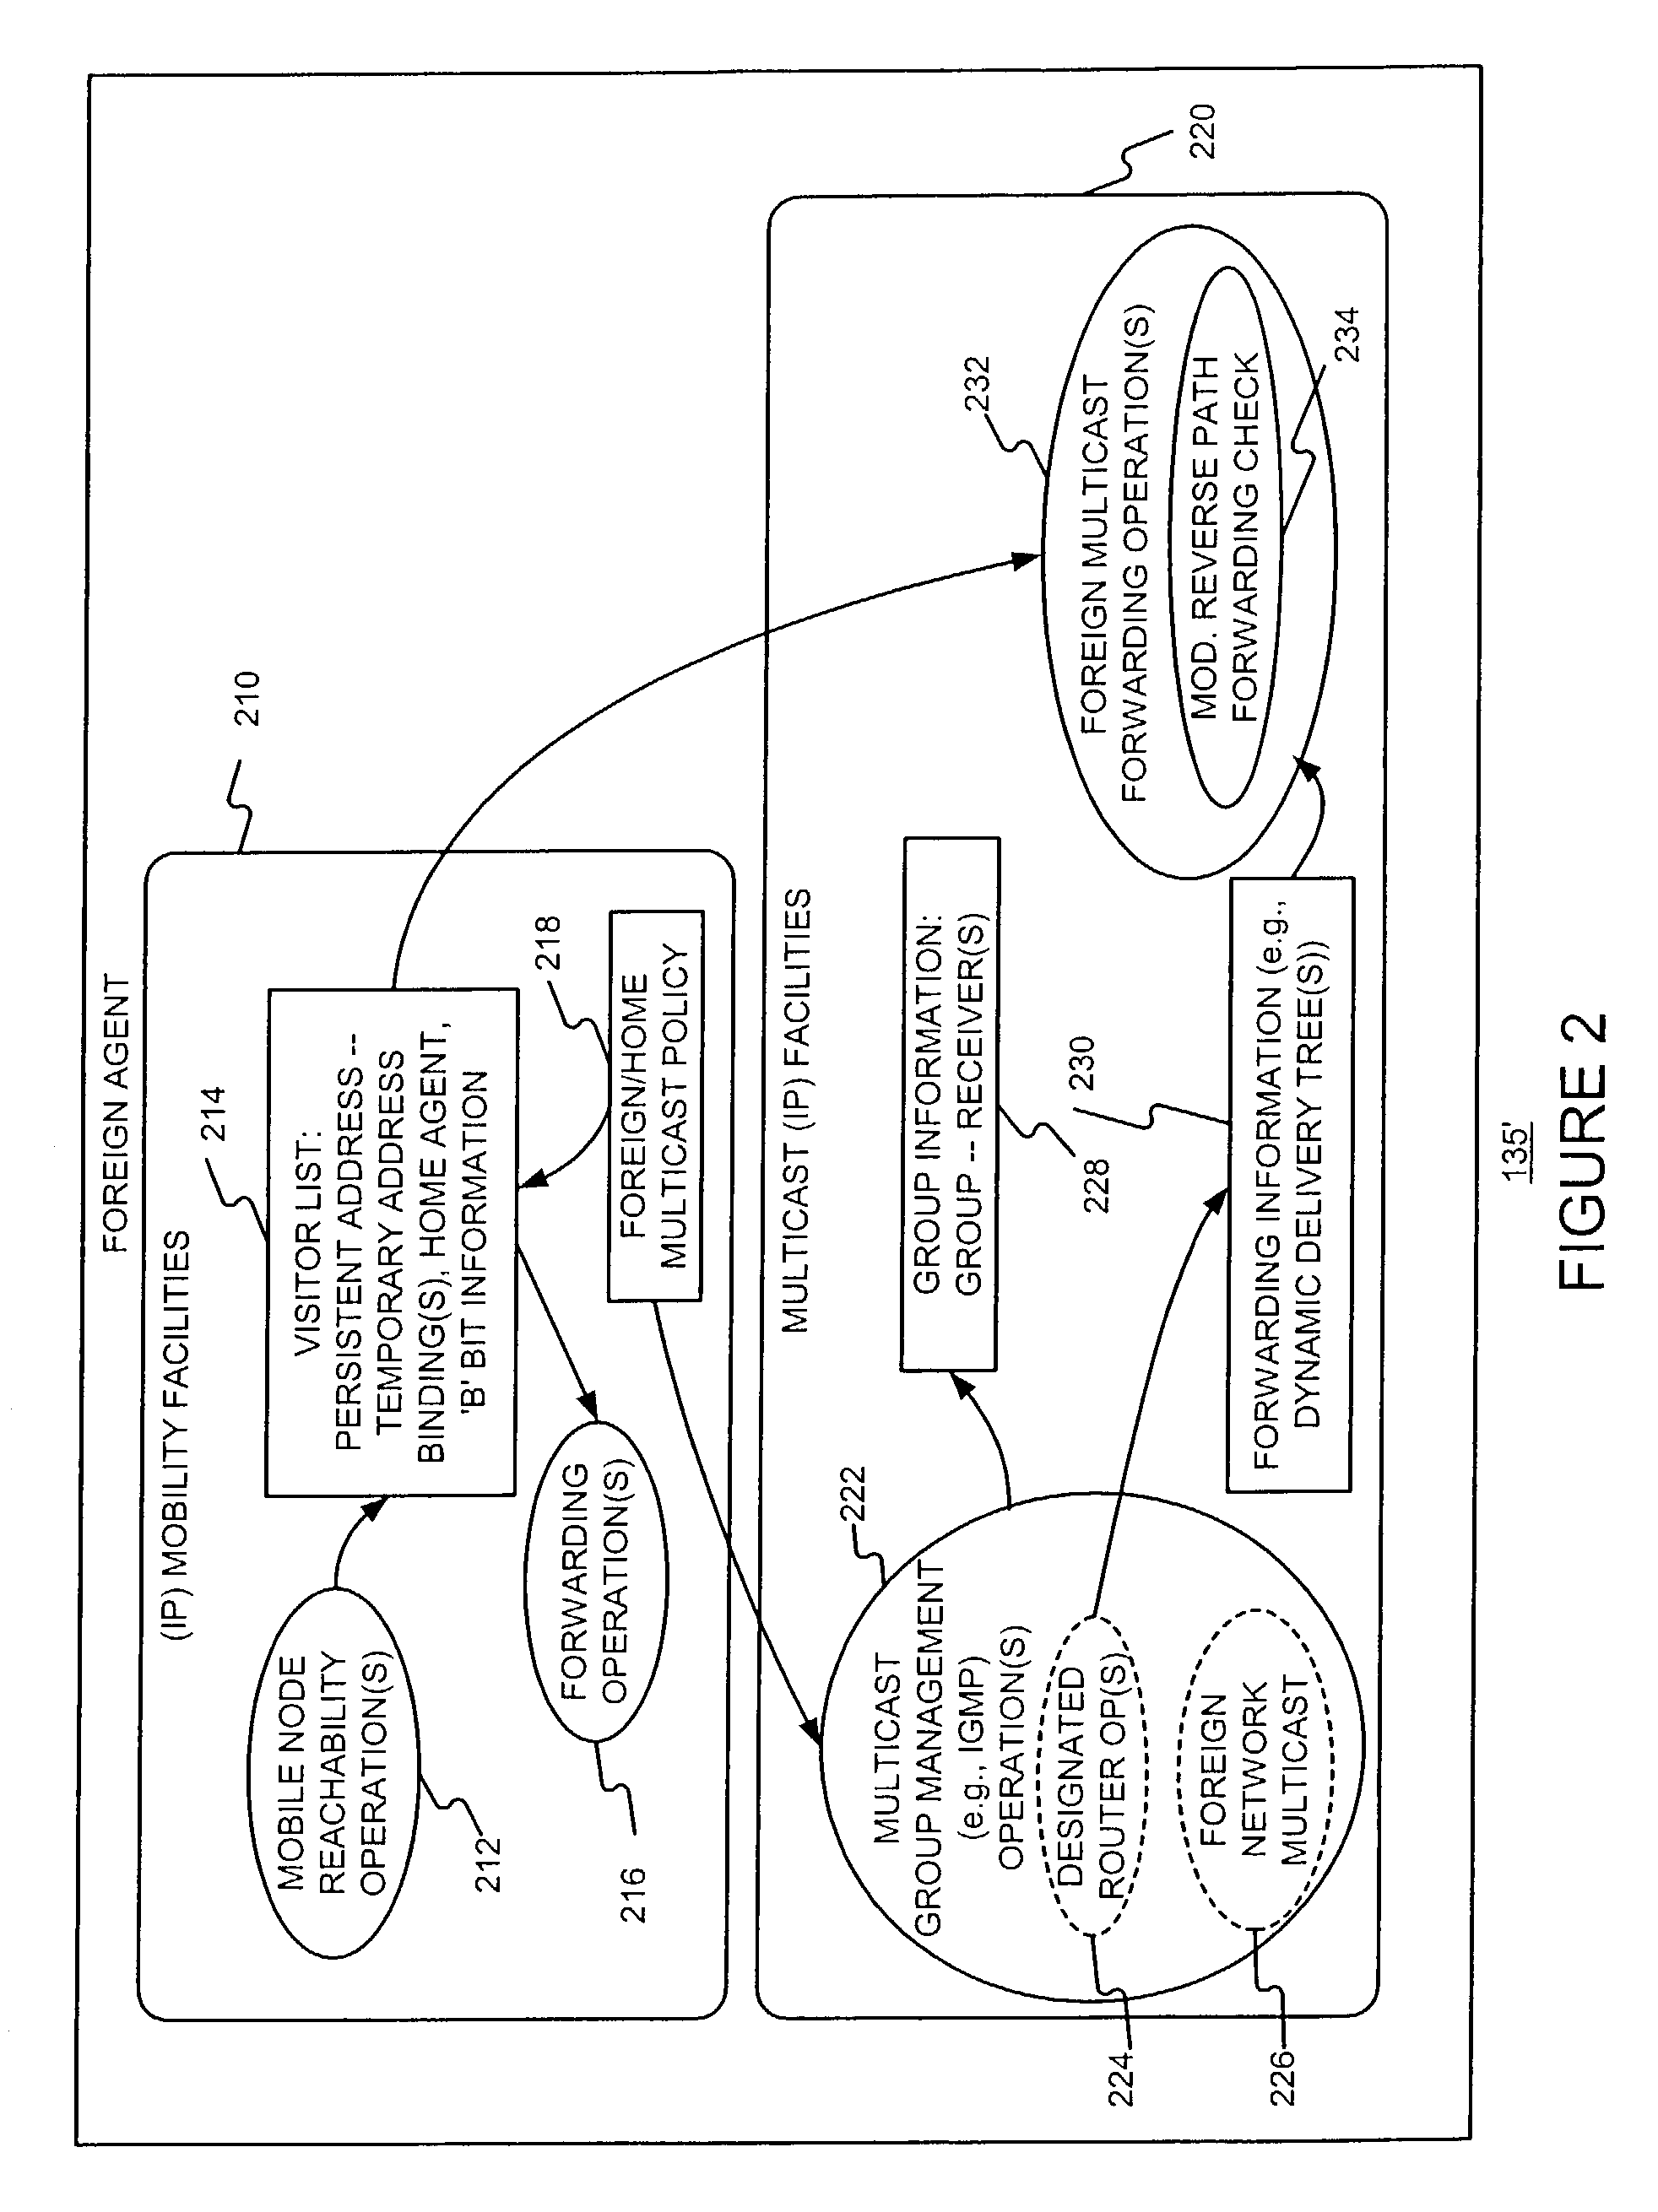 Enabling foreign network multicasting for a roaming mobile node, in a foreign network, using a persistent address